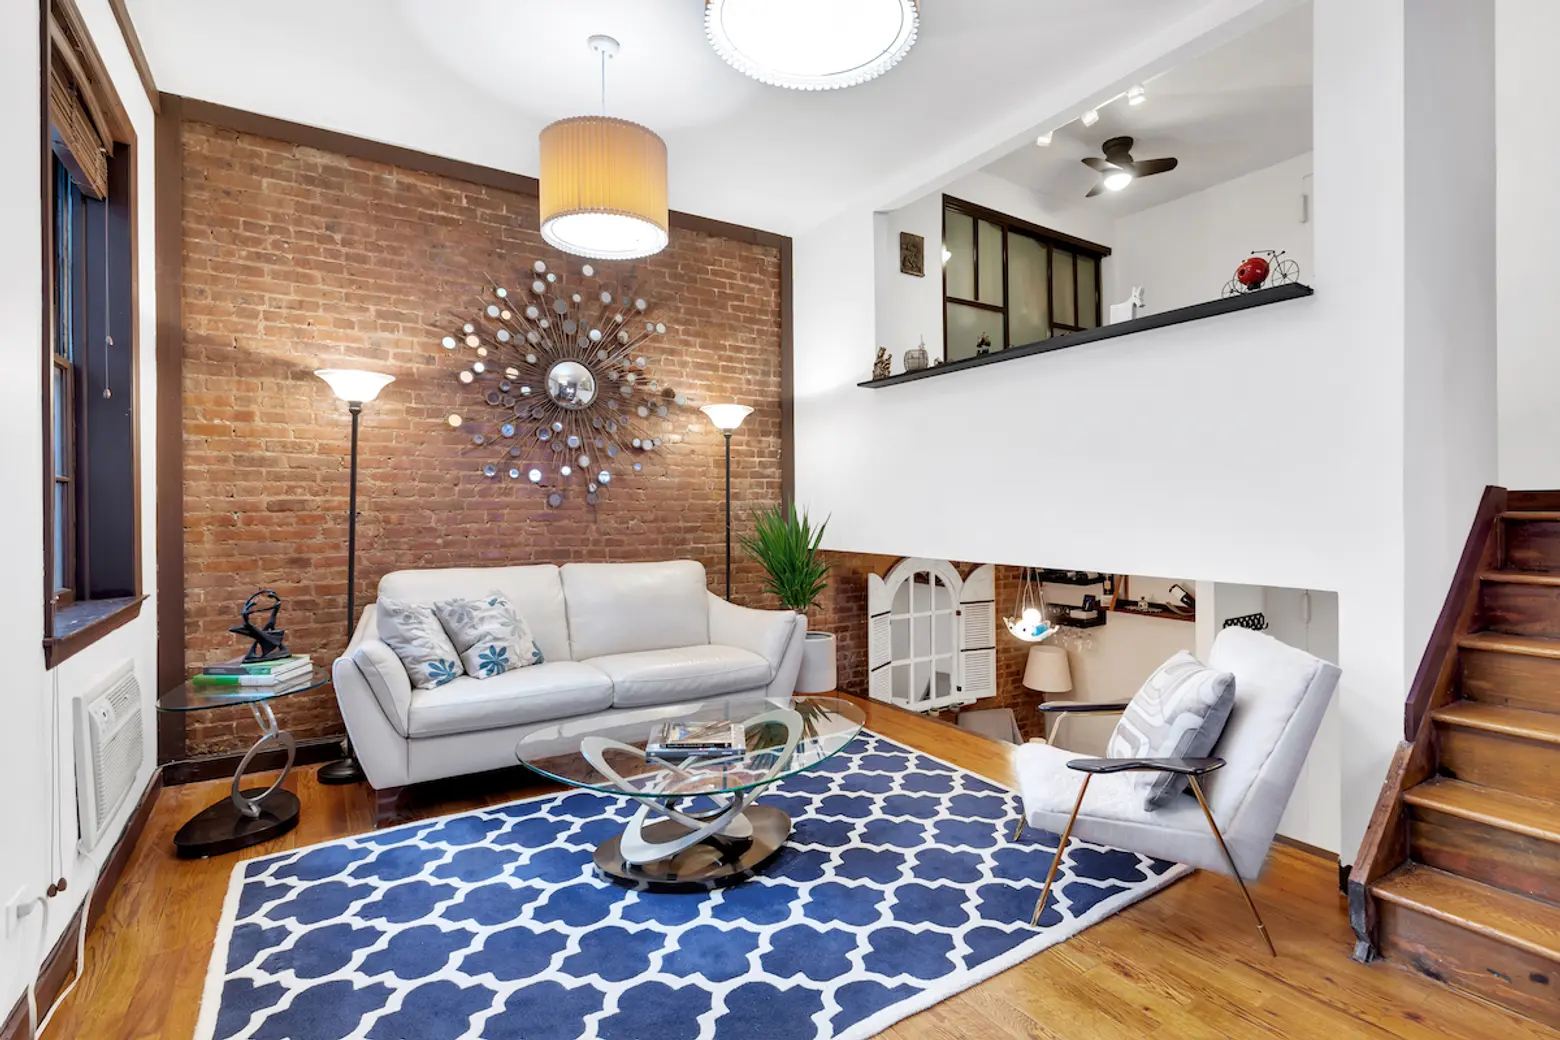 This Upper West Side brownstone co-op gives you three levels to love for $725K